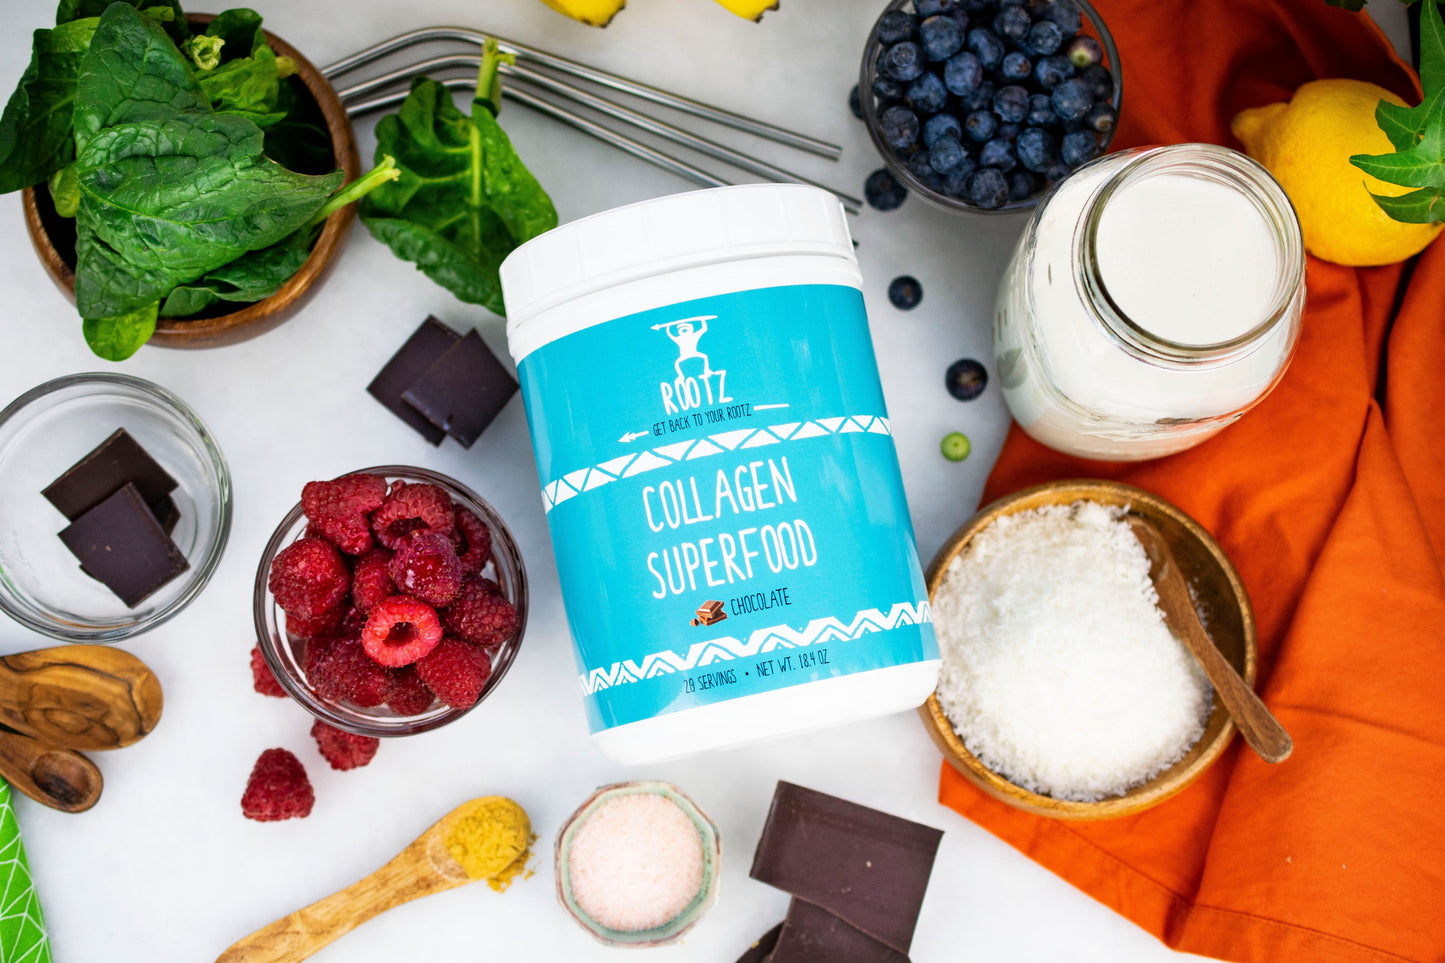 Collagen Superfood x1 - Special Offer